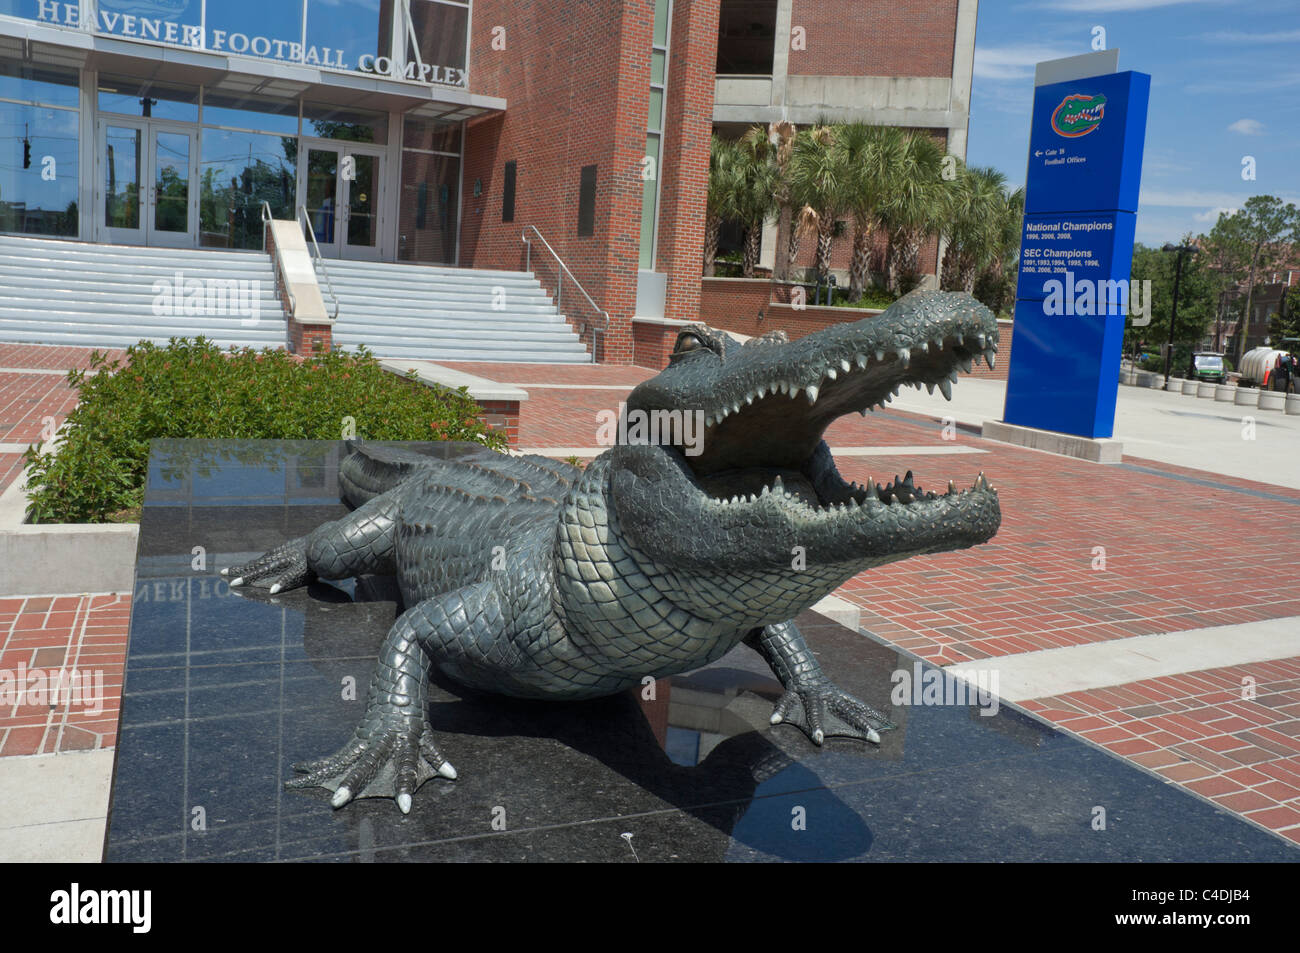 Bull Gator Plaza at the Heavener Football complex and Ben Hill Griffin Stadium on the University of Florida Campus Gainesville Stock Photo